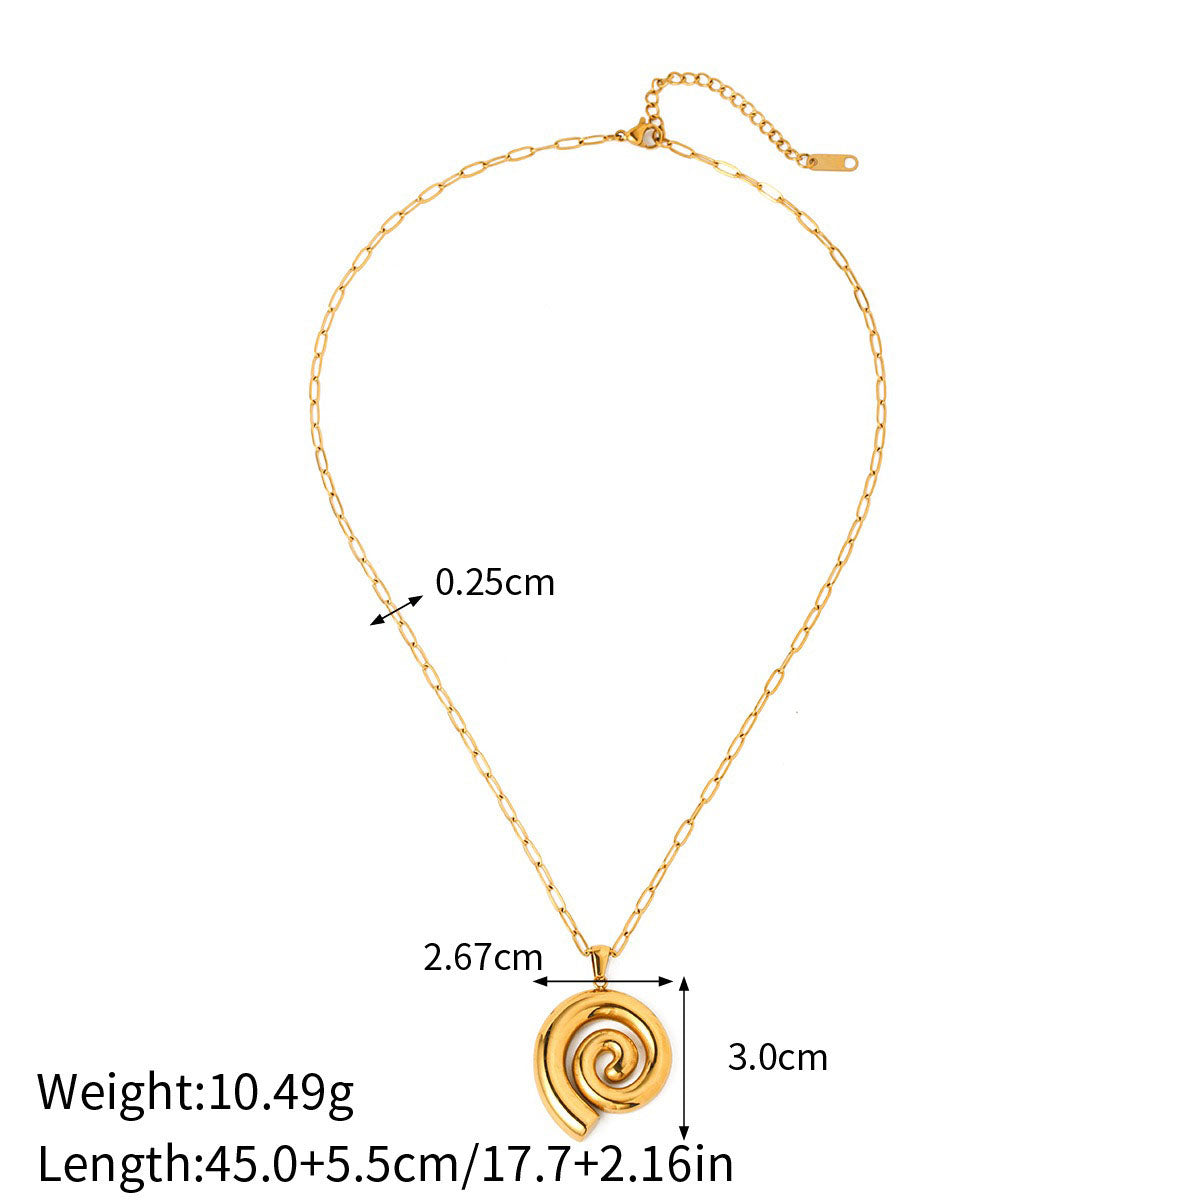 18k gold trendy and fashionable threaded circle design pendant necklace